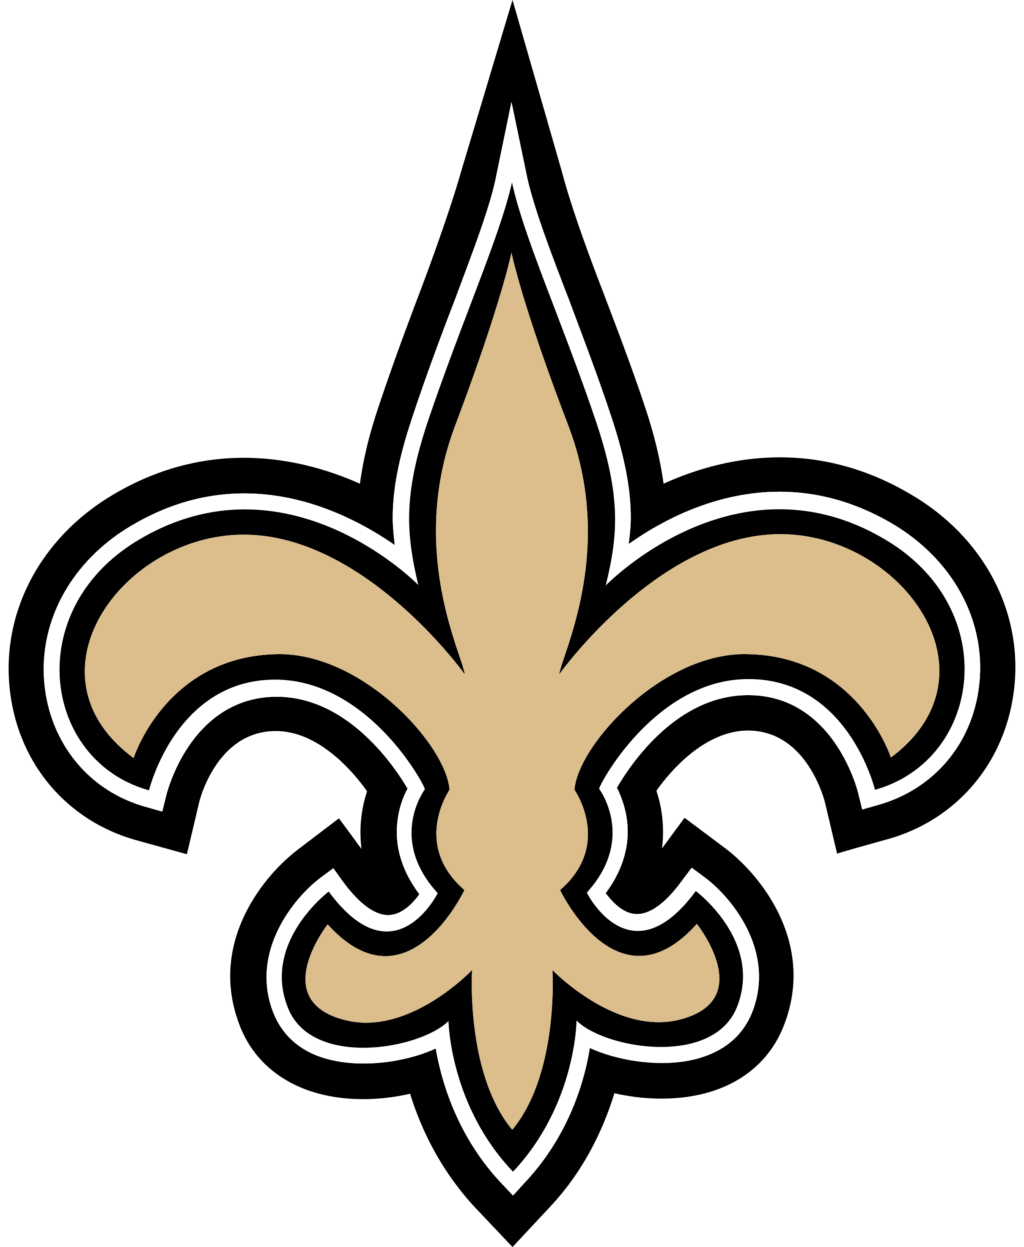 new orleans saints 01 12 Styles NFL New Orleans Saints svg. New Orleans Saints svg, eps, dxf, png. New Orleans Saints Vector Logo Clipart, New Orleans Saints Clipart svg, Files For Silhouette, New Orleans Saints Images Bundle, New Orleans Saints Cricut files, Instant Download.